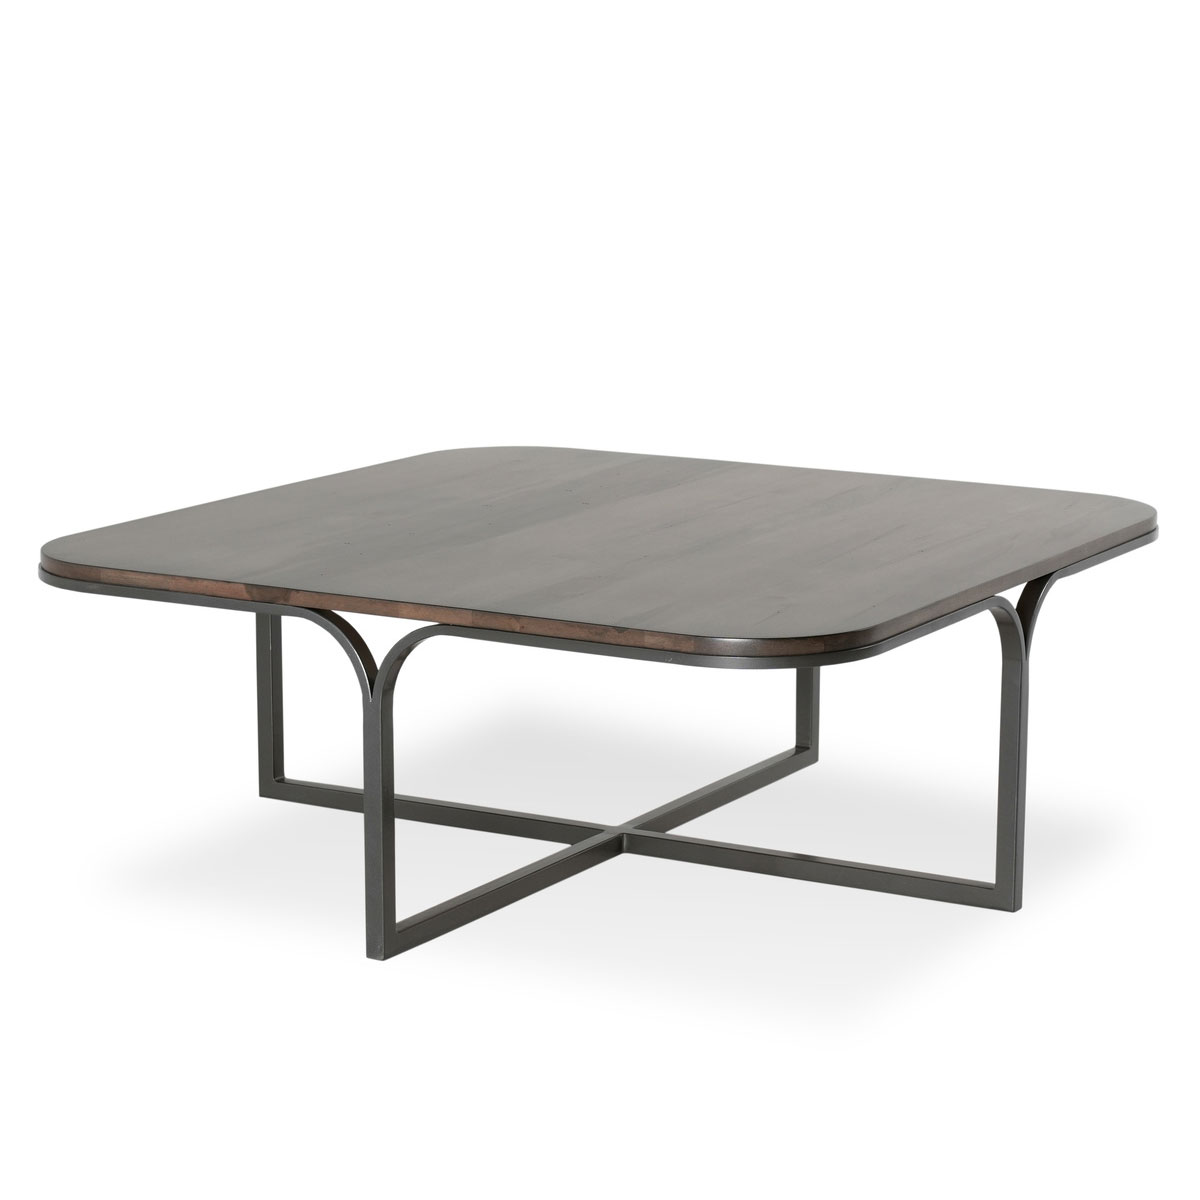 Charleston Forge Wave 48 inch Square Cocktail Table